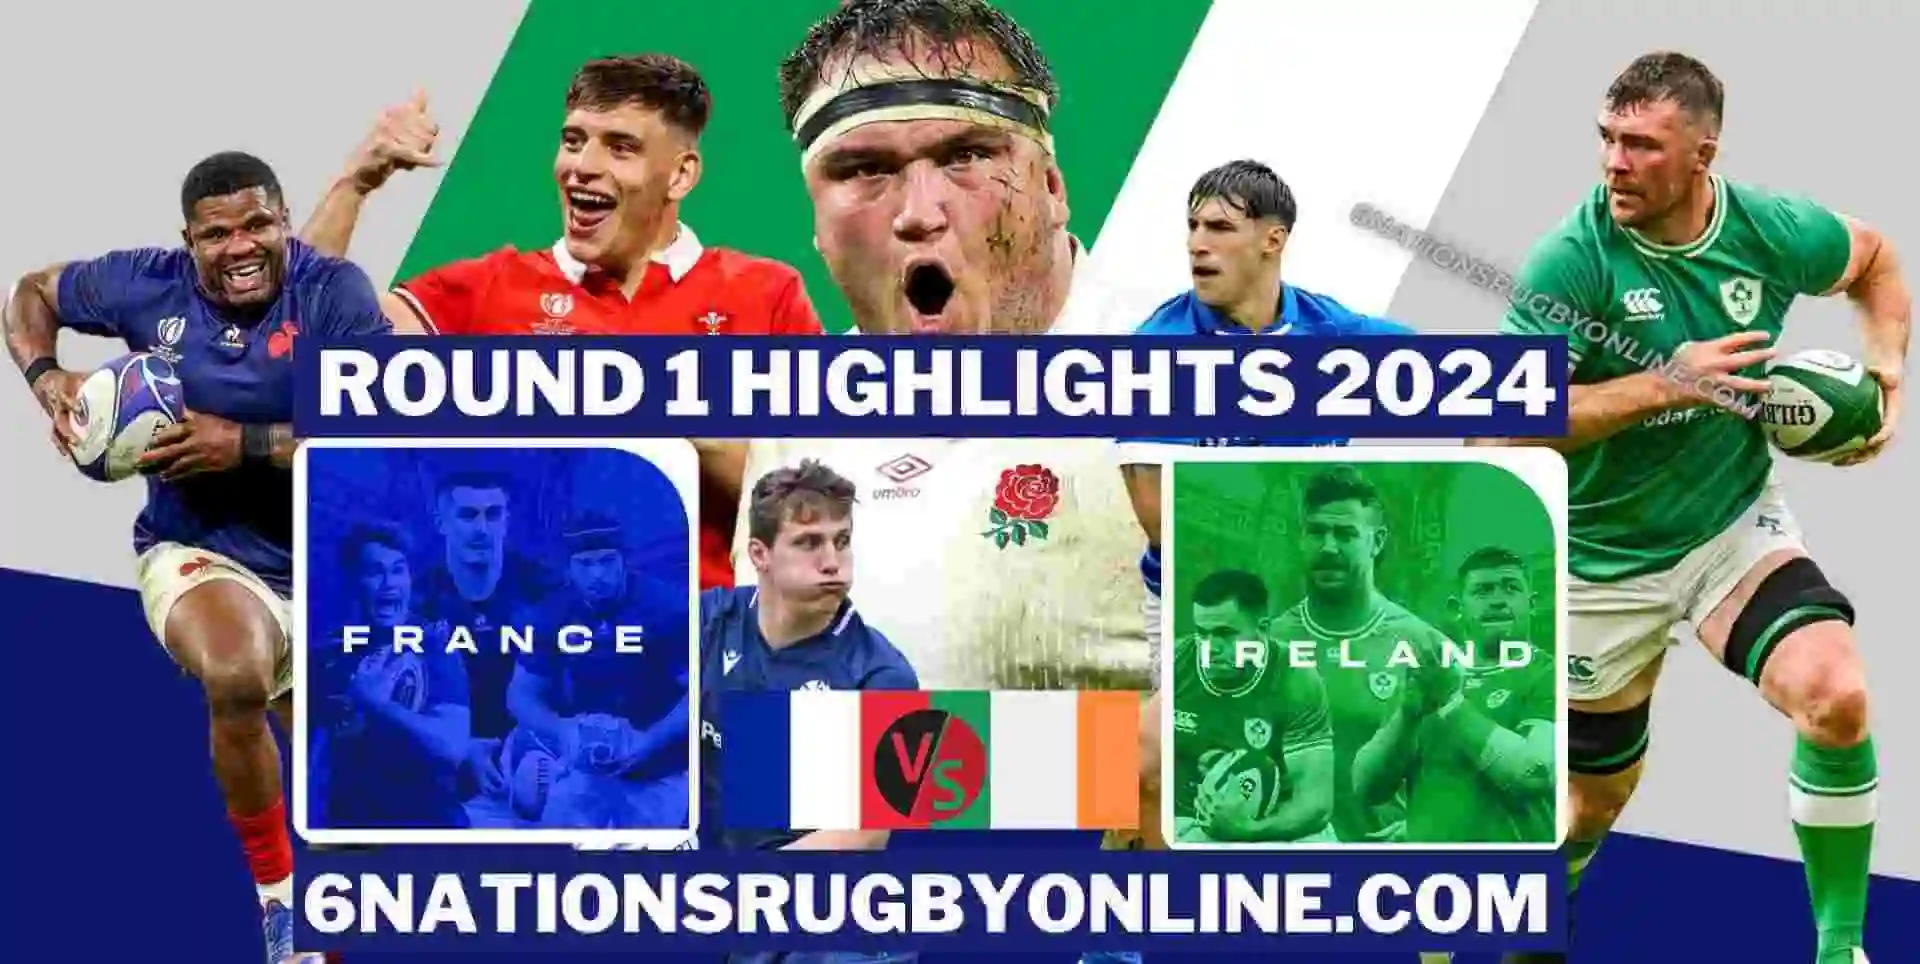 France Vs Ireland Rugby Highlights 2024 Round 1